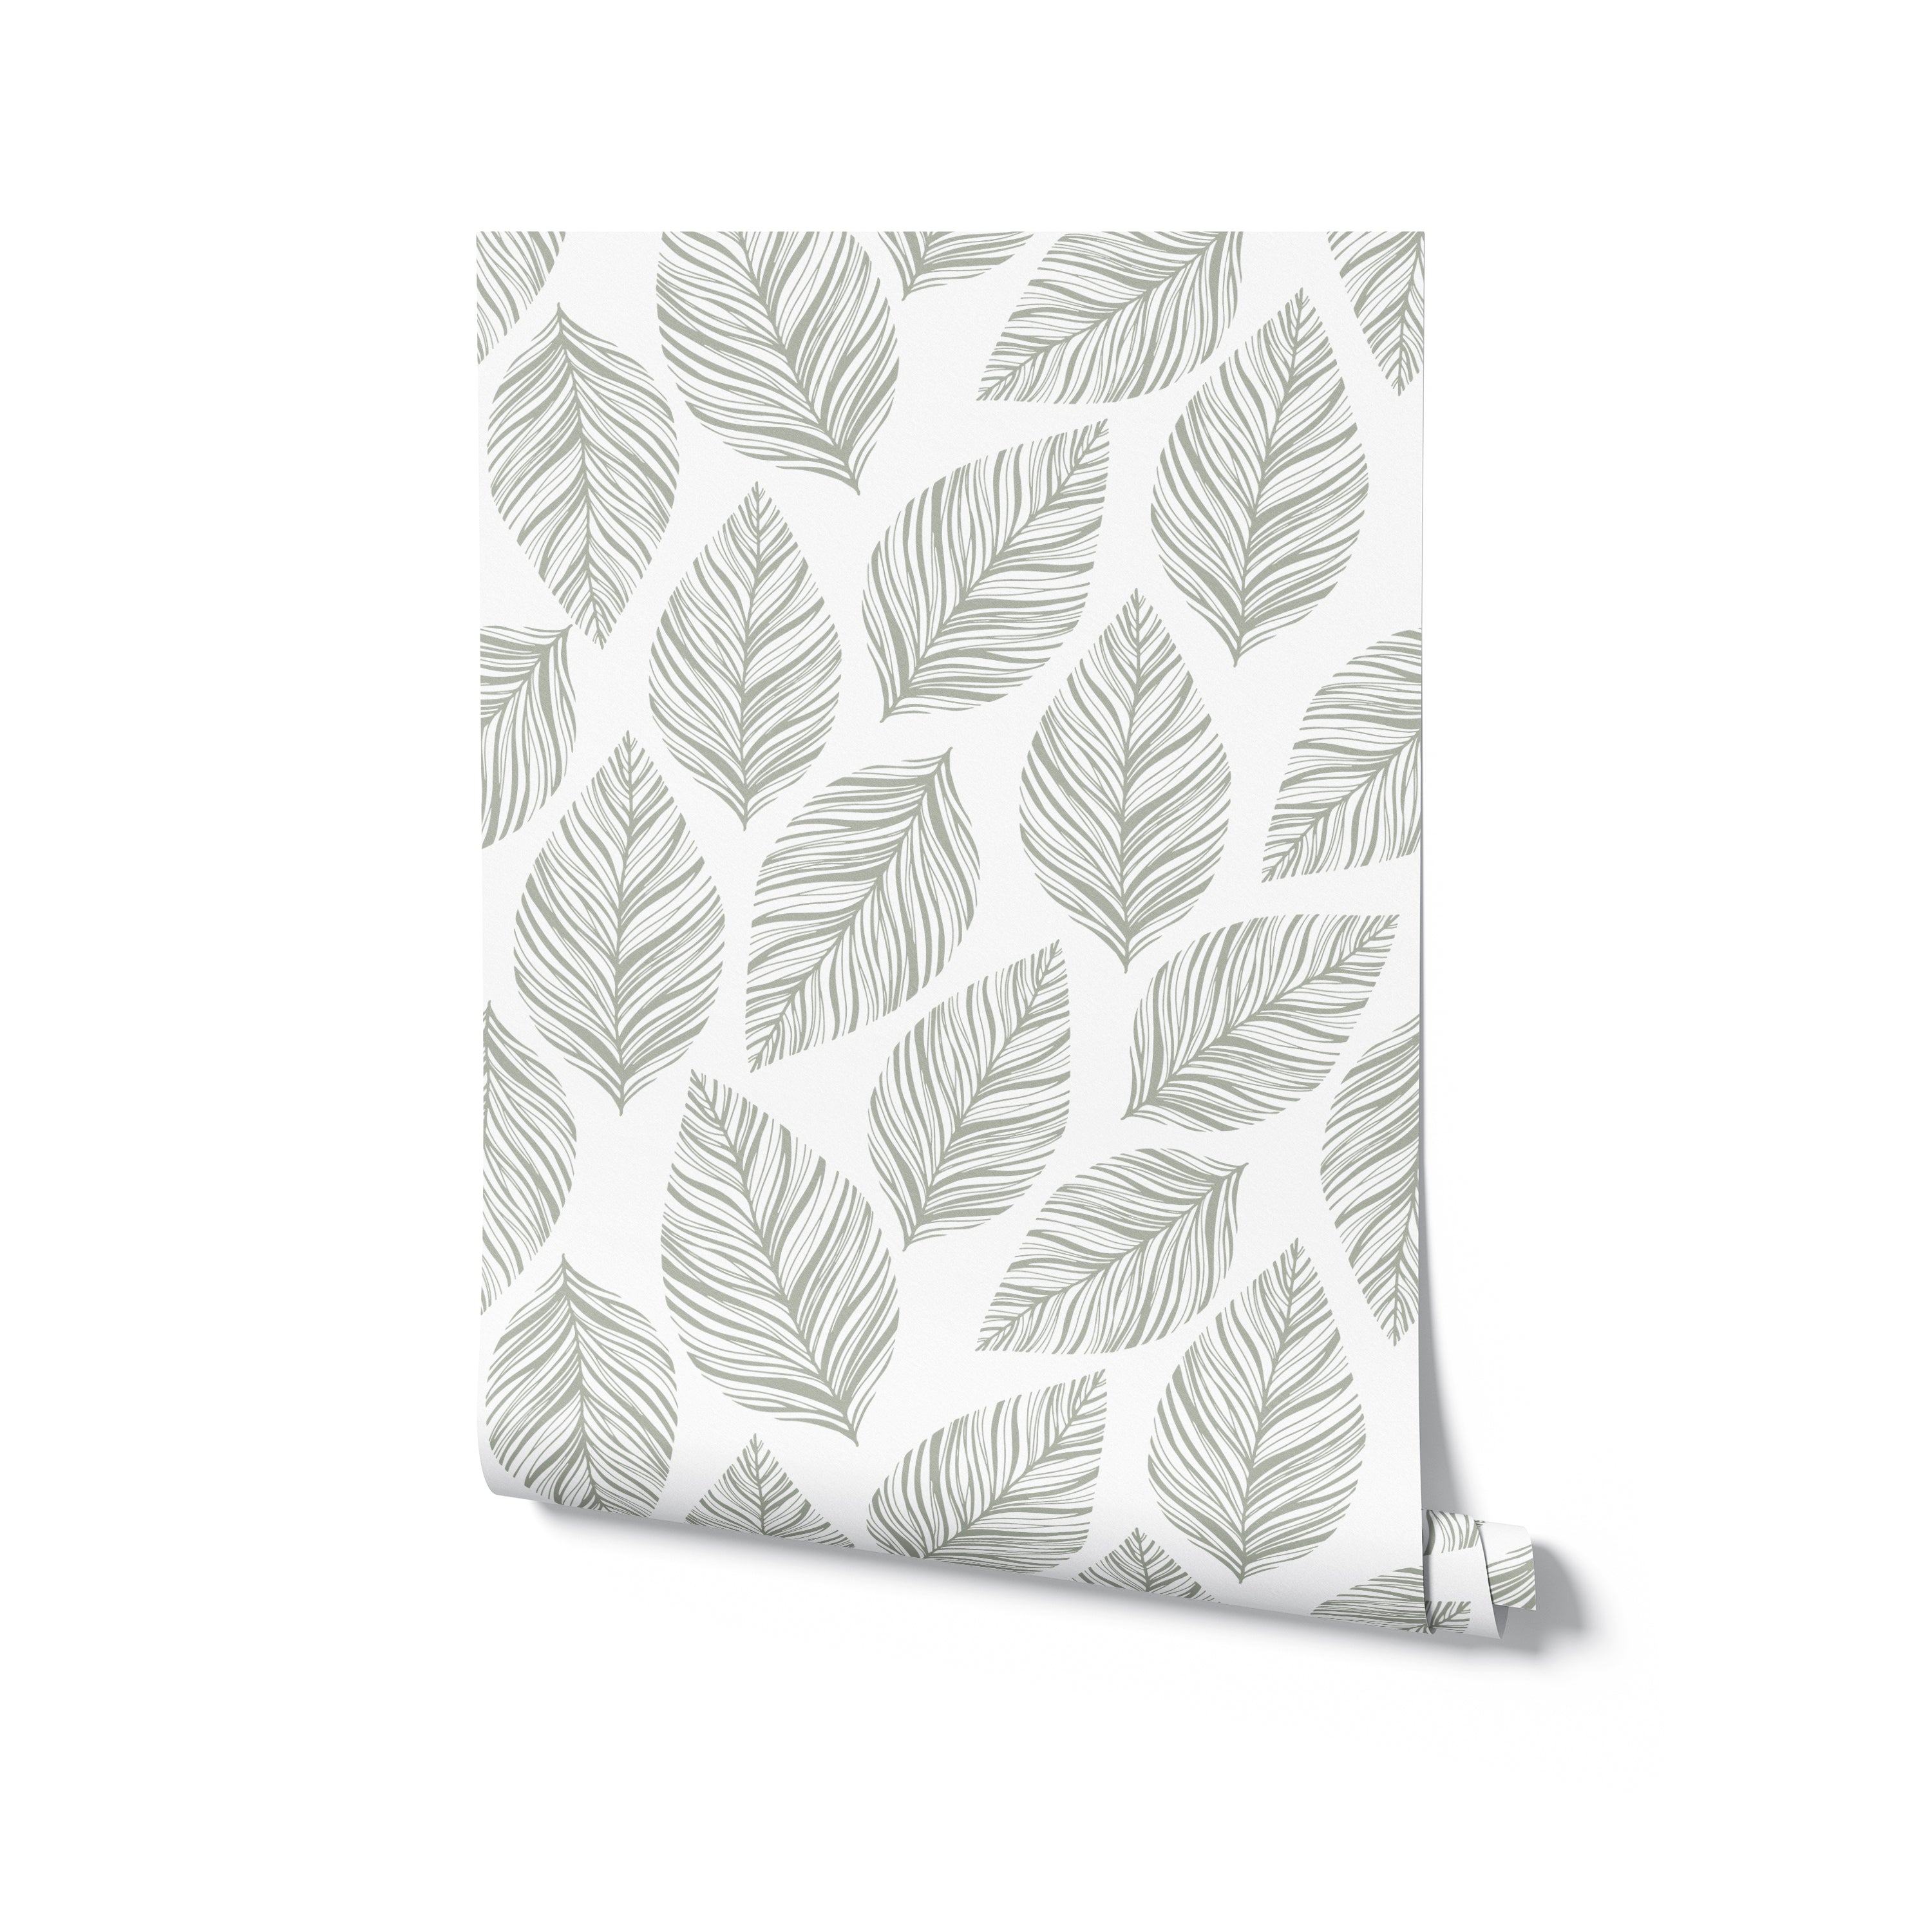 A roll of Leafy Wallpaper, featuring a beautifully detailed pattern of leaves in grey on a white background. The wallpaper exudes a calm and refreshing feel, perfect for enhancing living spaces with a touch of nature